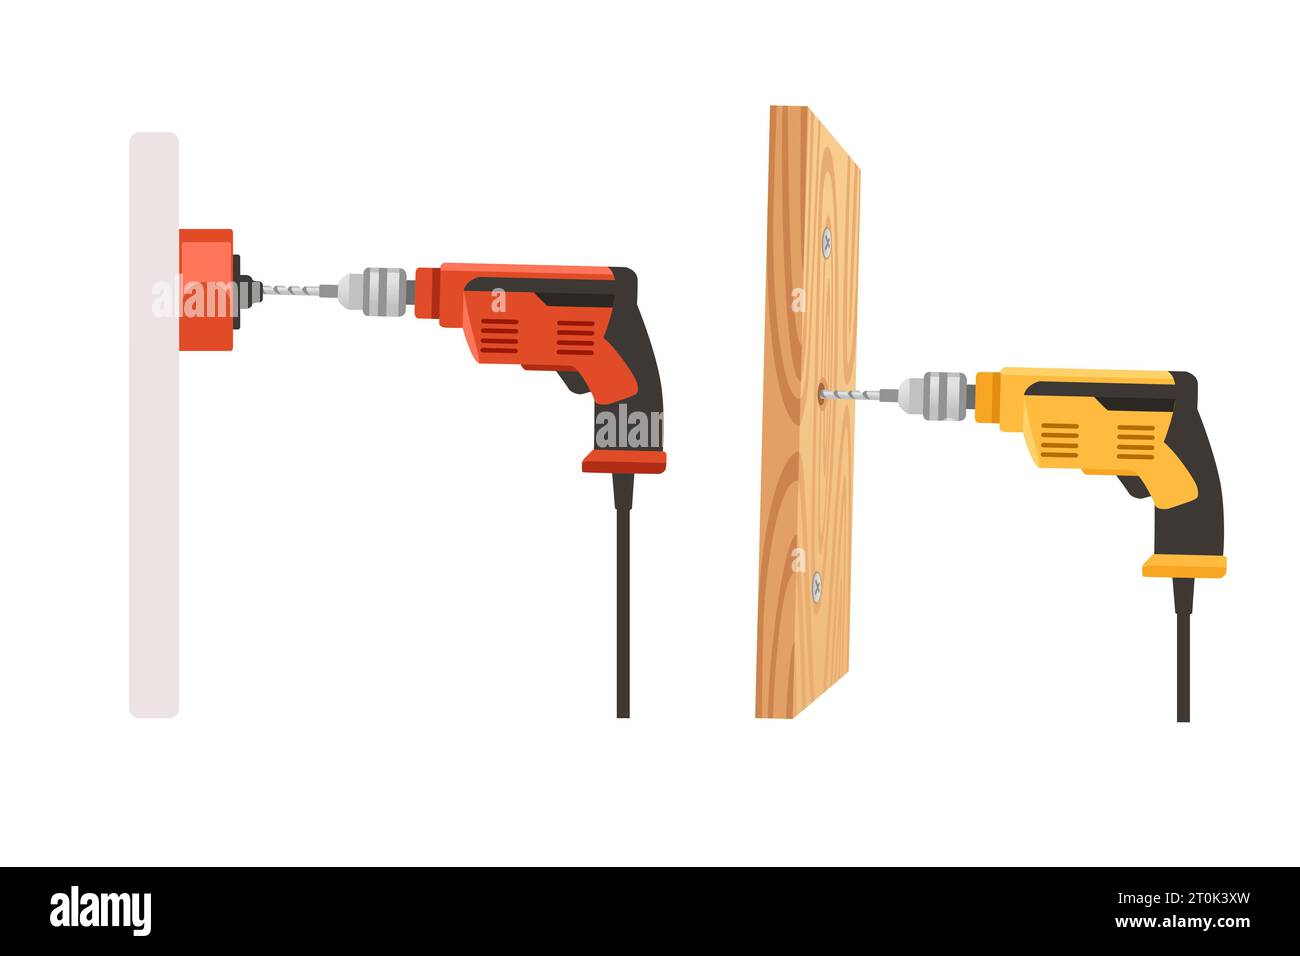 Drill drills holes for bolts in a wooden board vector illustration isolated on white background Stock Vector